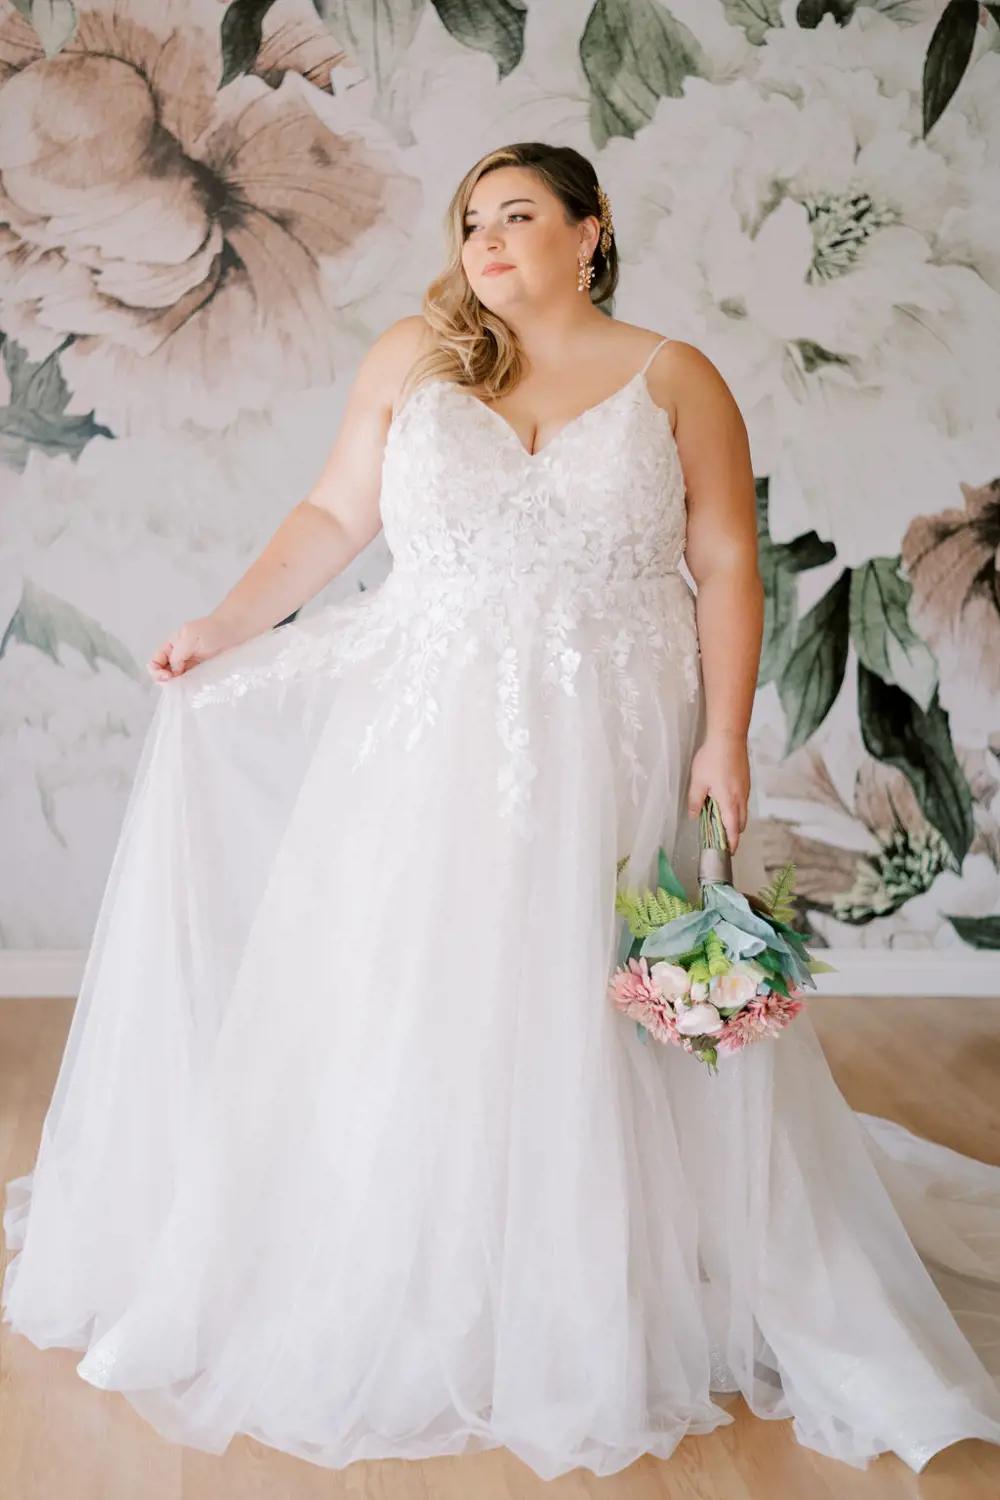 Plus Size Wedding Gowns at Charlotte's Weddings in Portland, Oregon